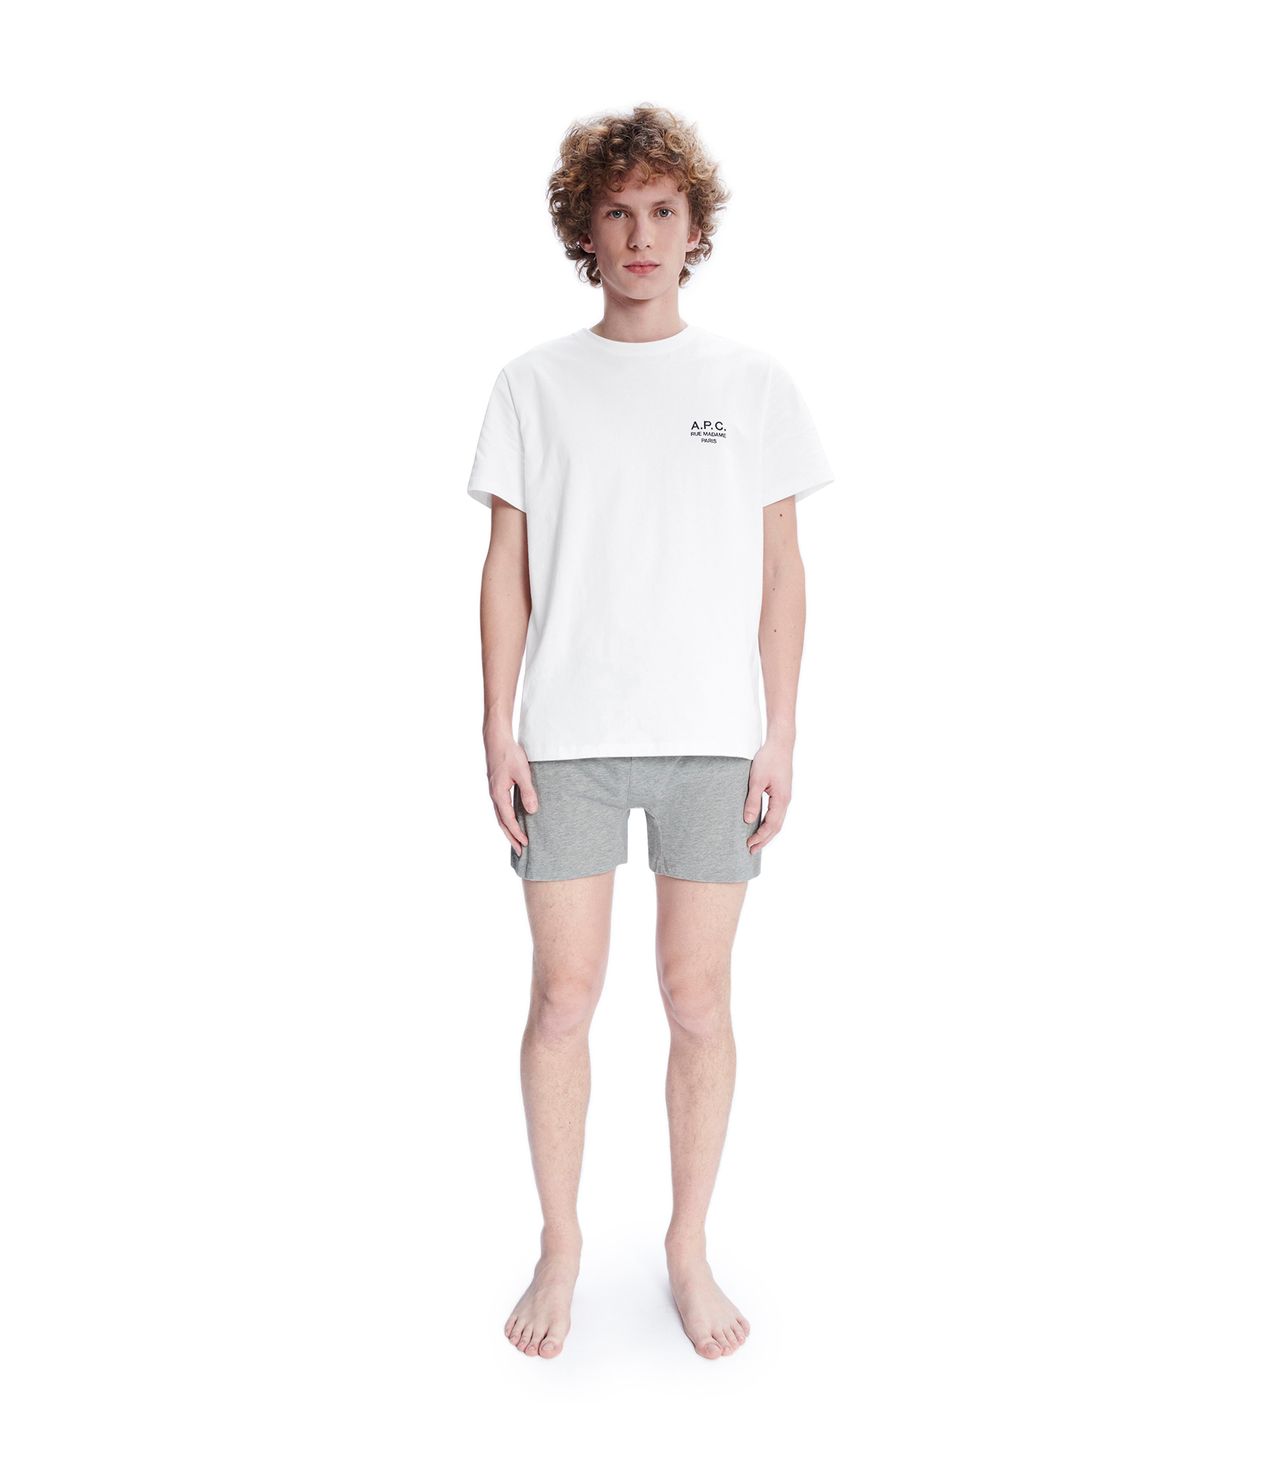 Cabourg boxer shorts PALE HEATHER GREY APC